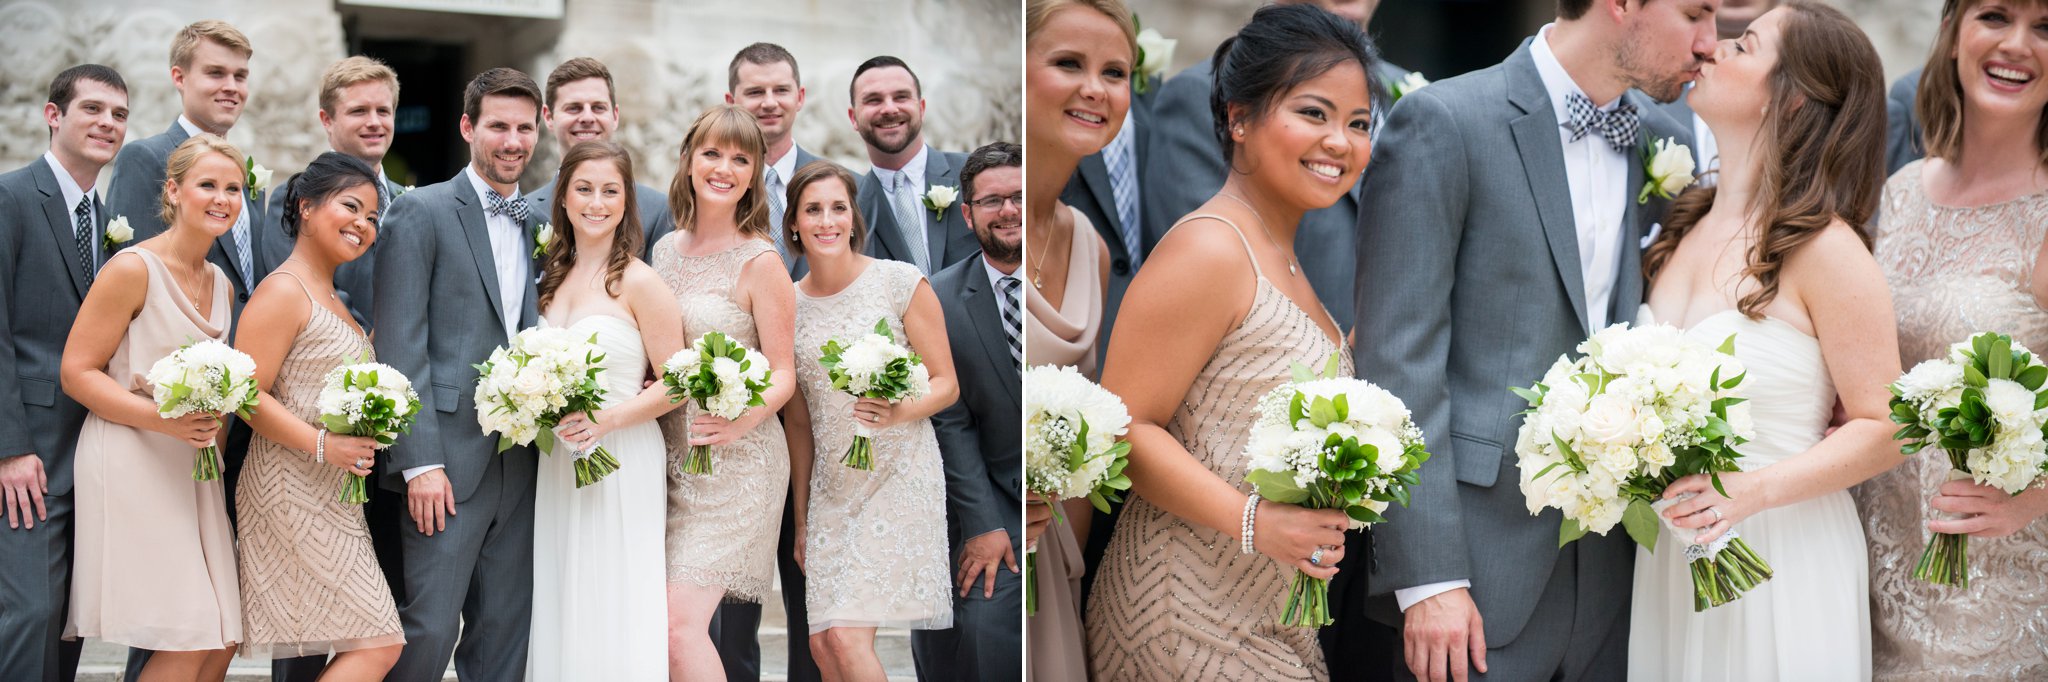 summer downtown Indianapolis wedding photography gold bridesmaids dresses